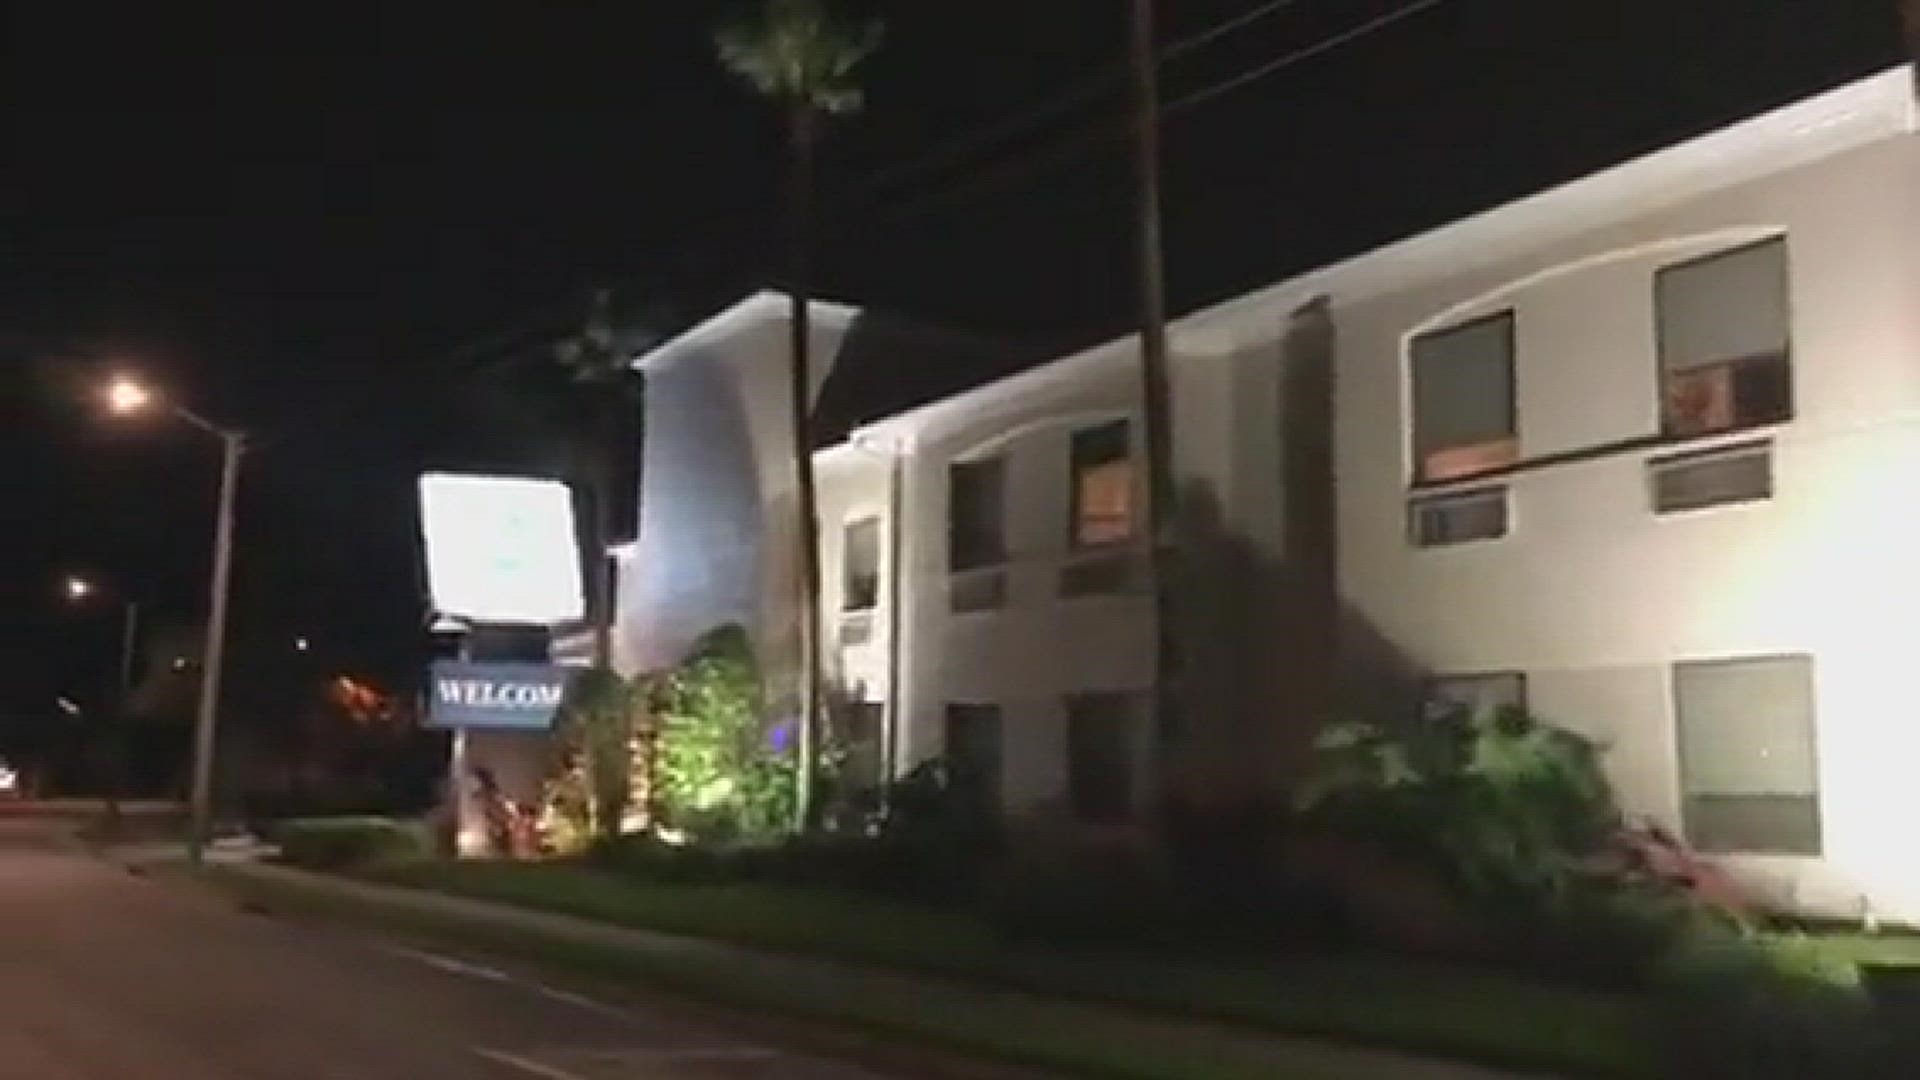 St. Augustine Inn sign tilted after #HurricaneIan
Credit: Renata Di Gregorio